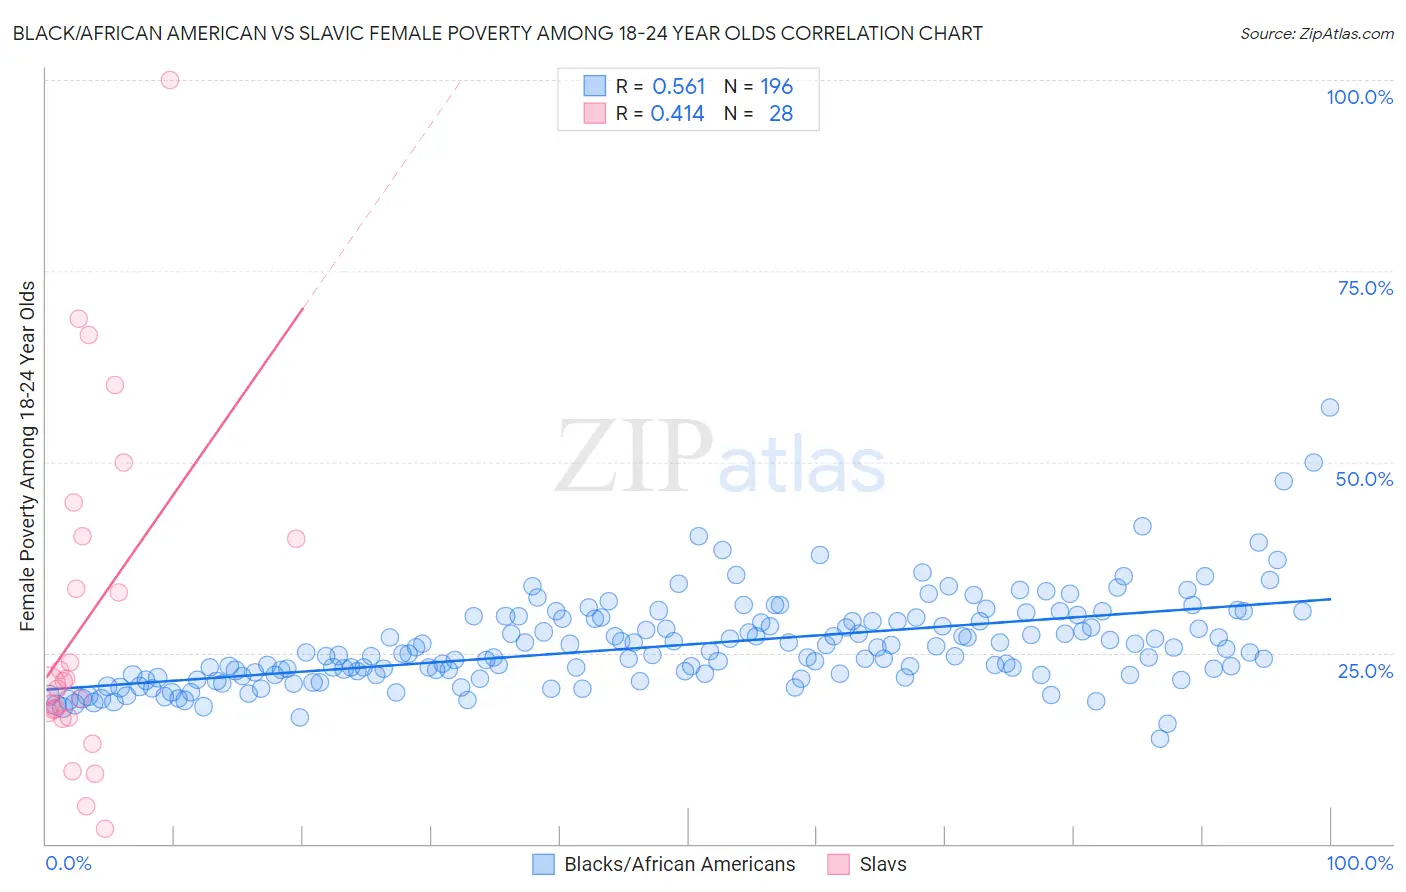 Black/African American vs Slavic Female Poverty Among 18-24 Year Olds